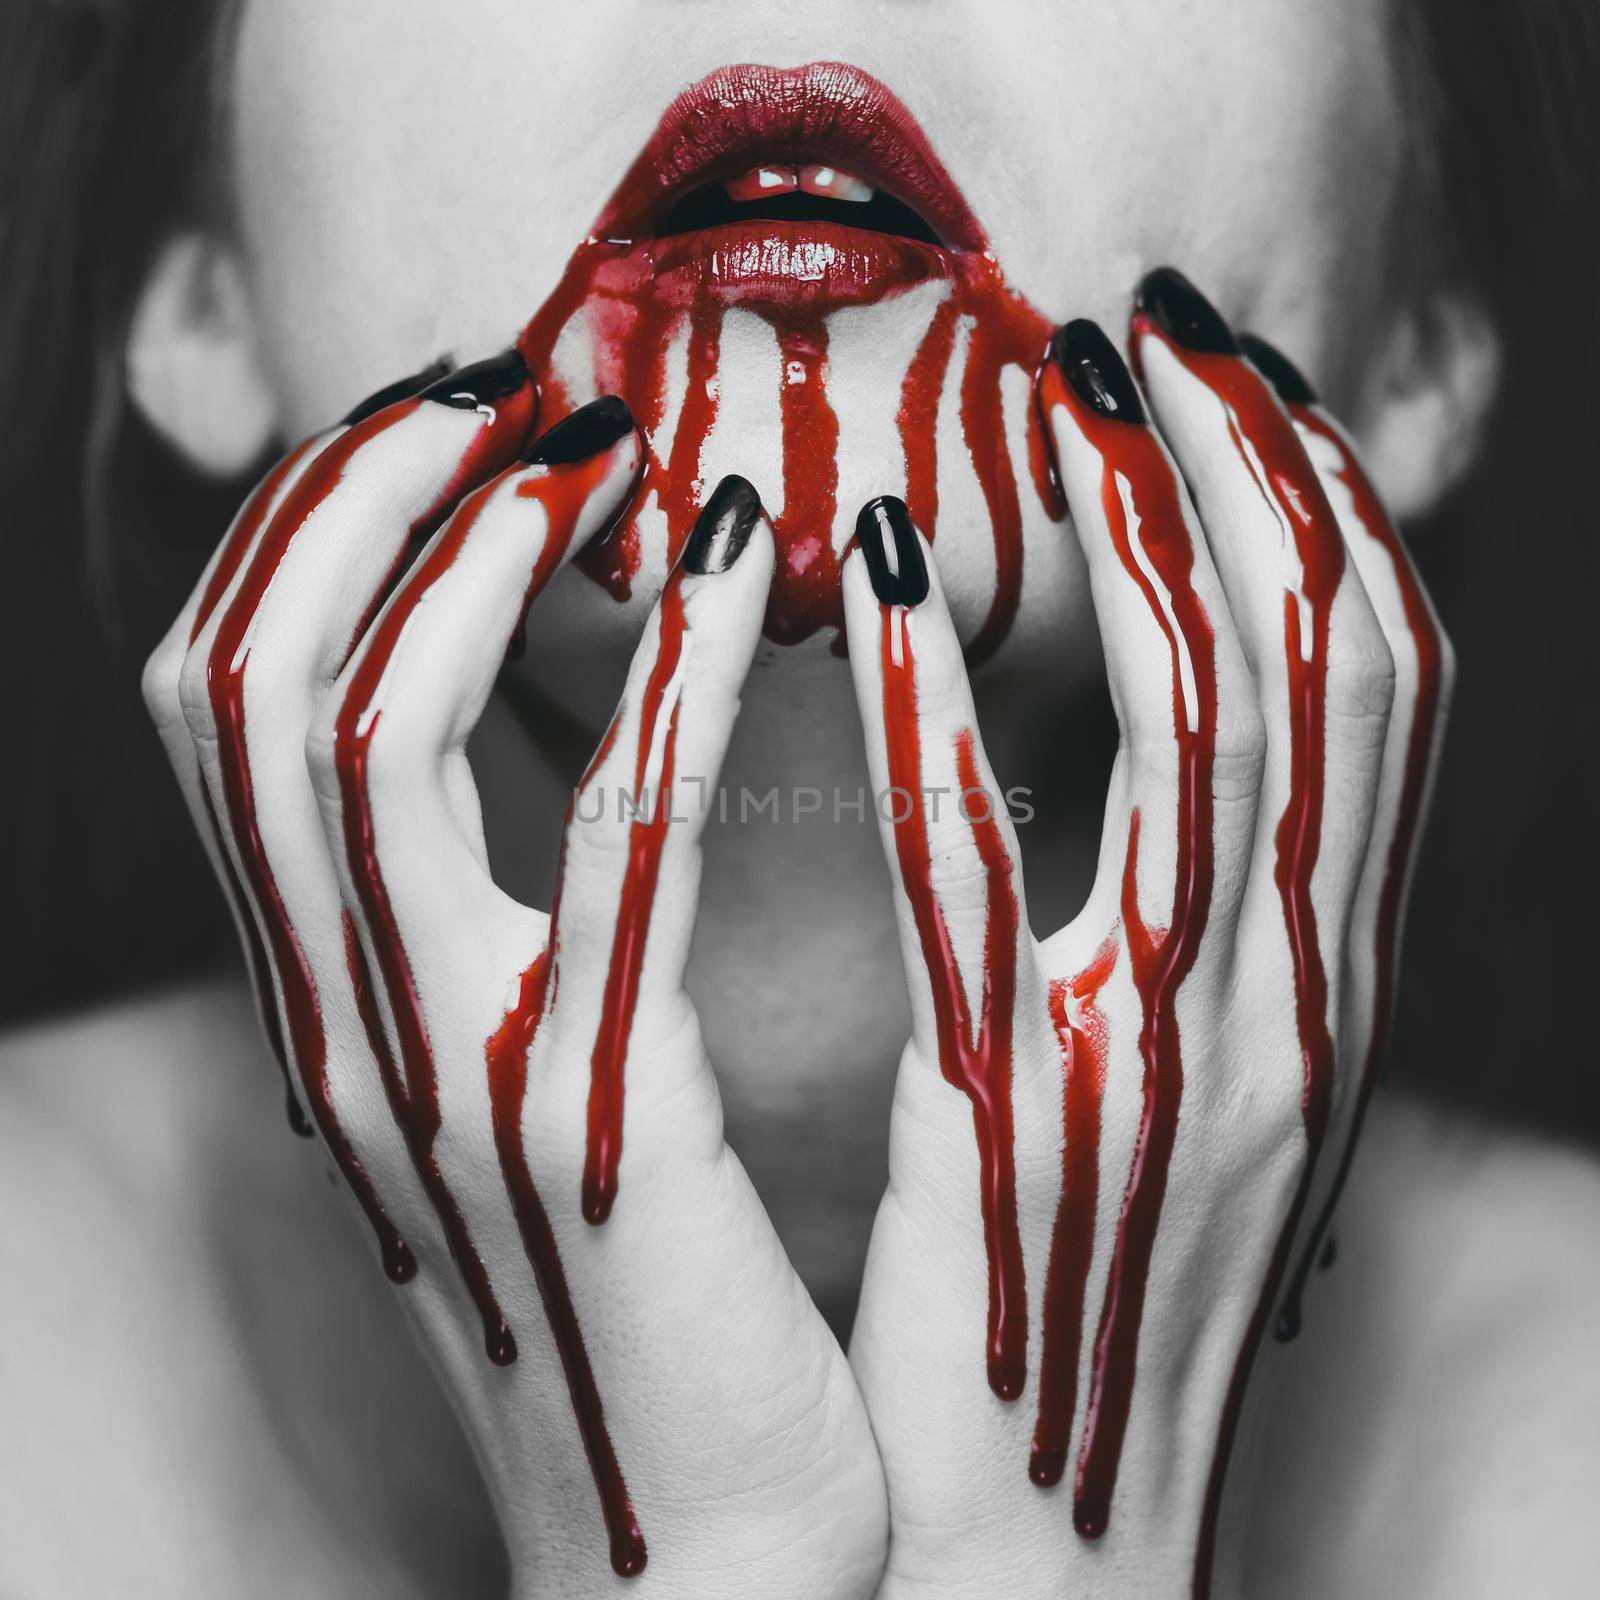 Young woman touching her face in blood. Halloween and horror theme. Black and white image with red elements